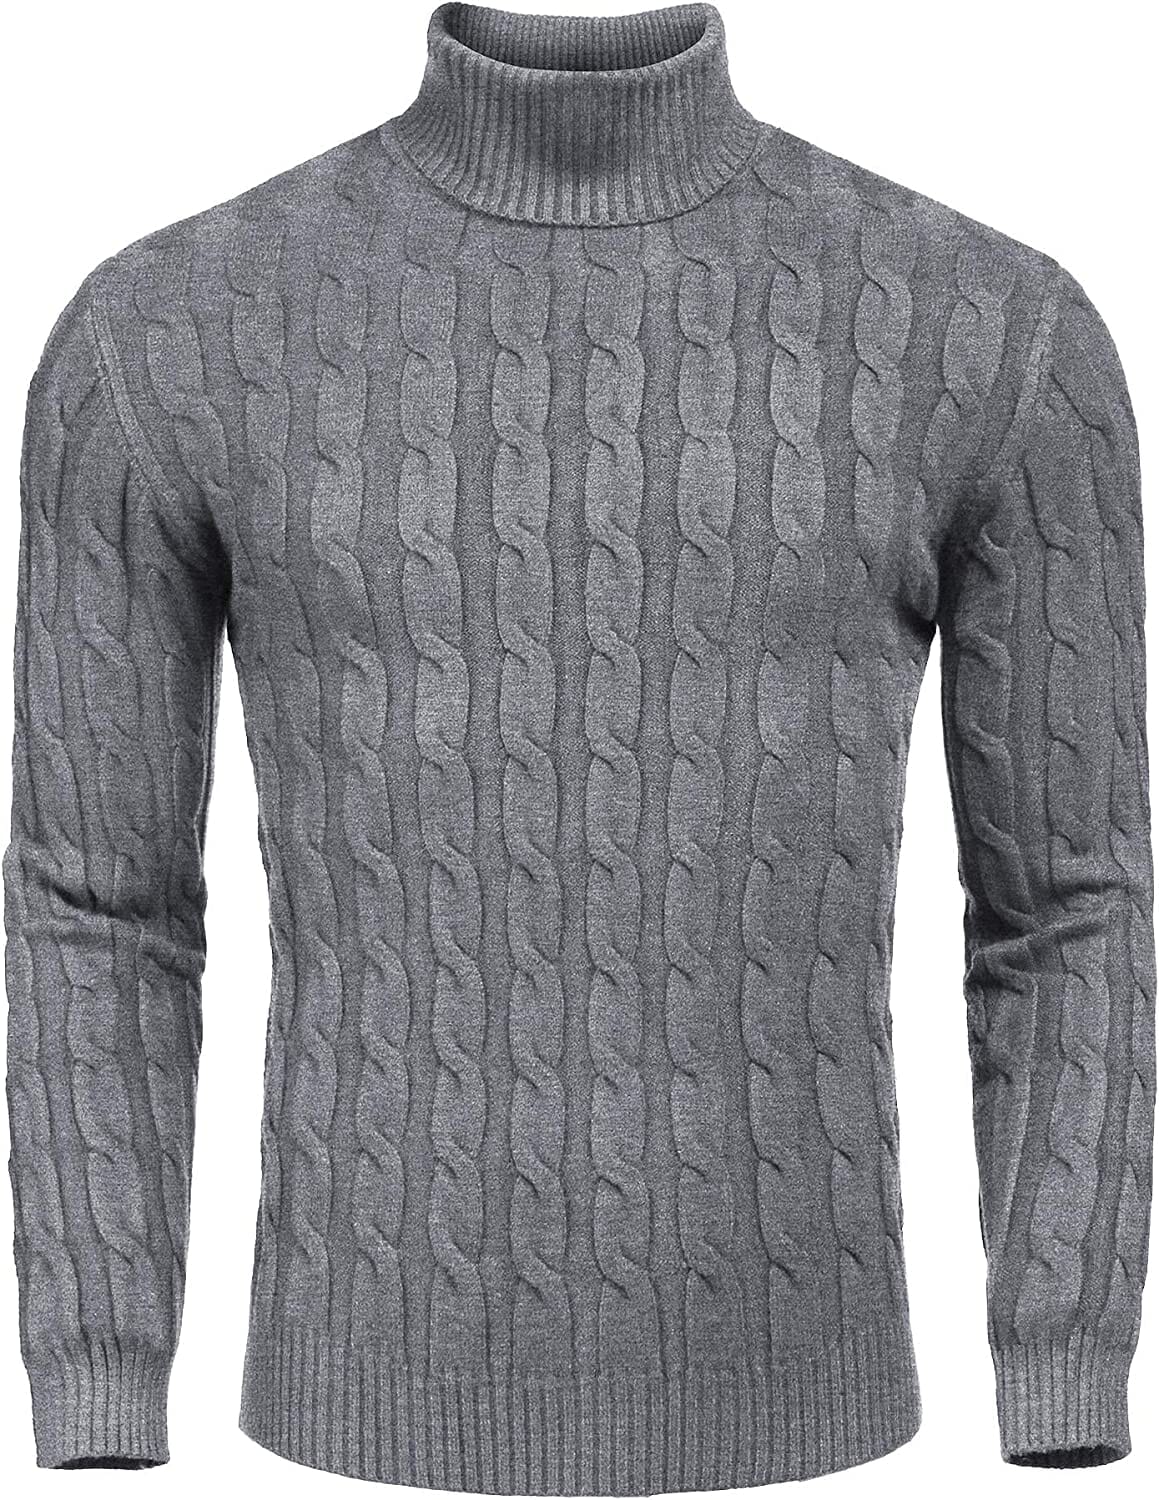 Slim Fit Turtleneck Twisted Knitted Pullover Sweater (US Only) Sweaters COOFANDY Store Dark Gray S 